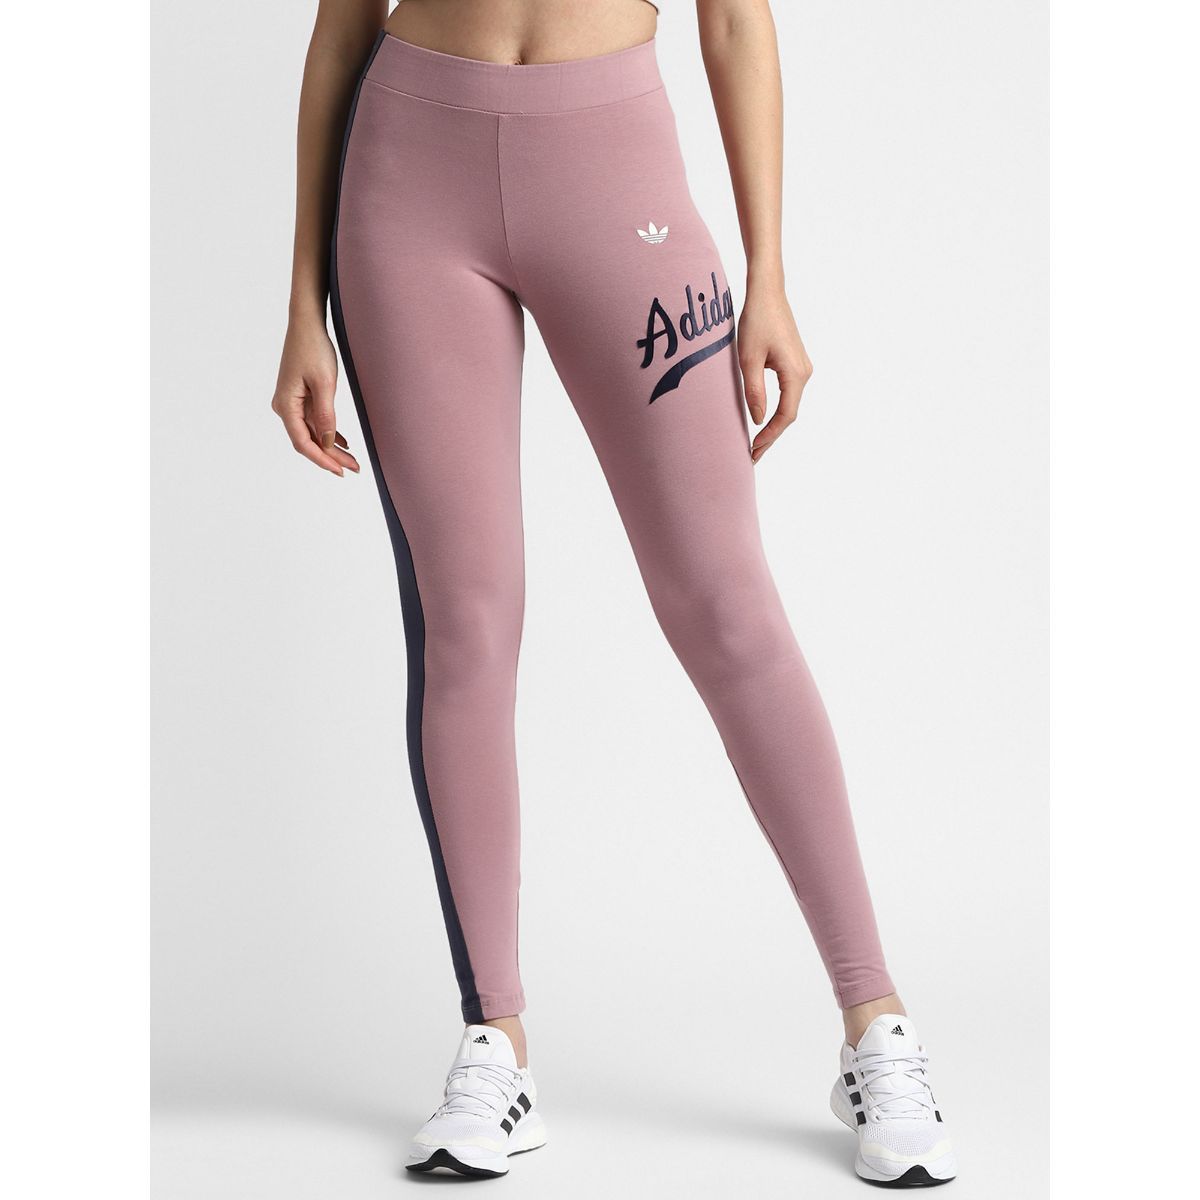 WOMENS ADIDAS HOW WE DO TIGHT BLACK  Total Performance Sports